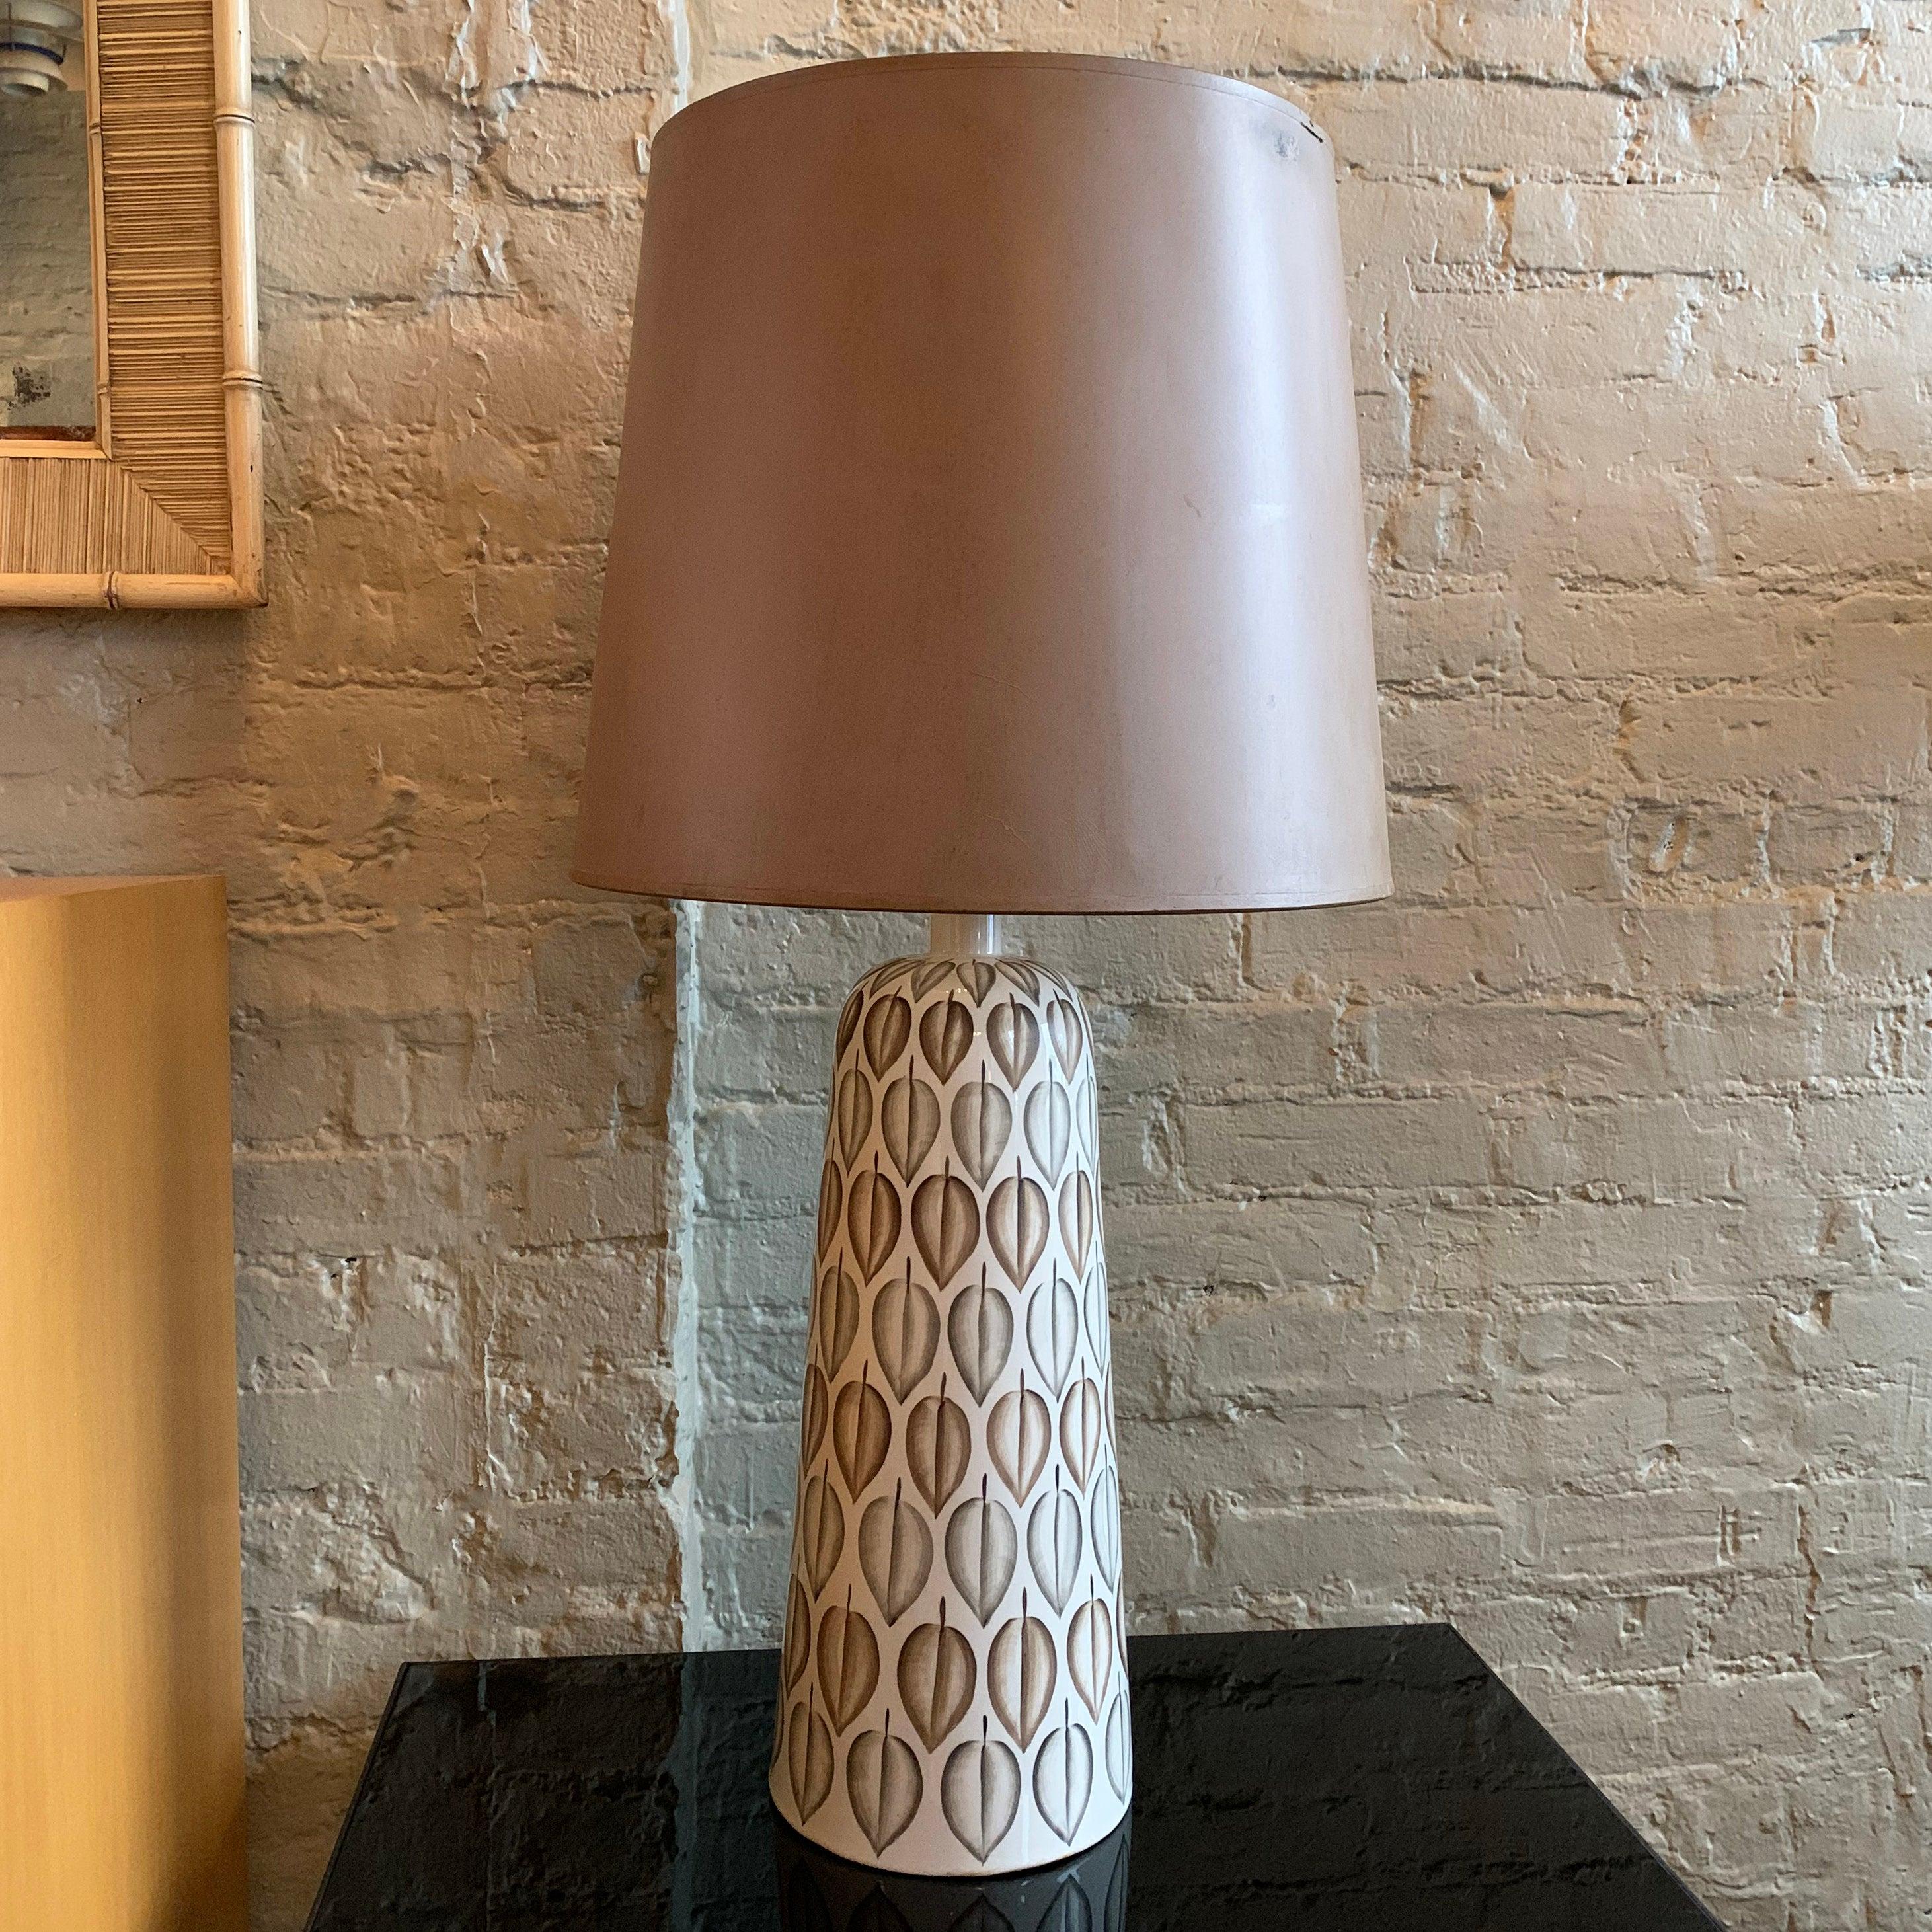 Mid-Century Modern, art pottery, table lamp features hand painted leaves on a ceramic base with milk glass under shade that the original, brown shade with reflective interior rests on. Lamp height without the shade is 27 inches.